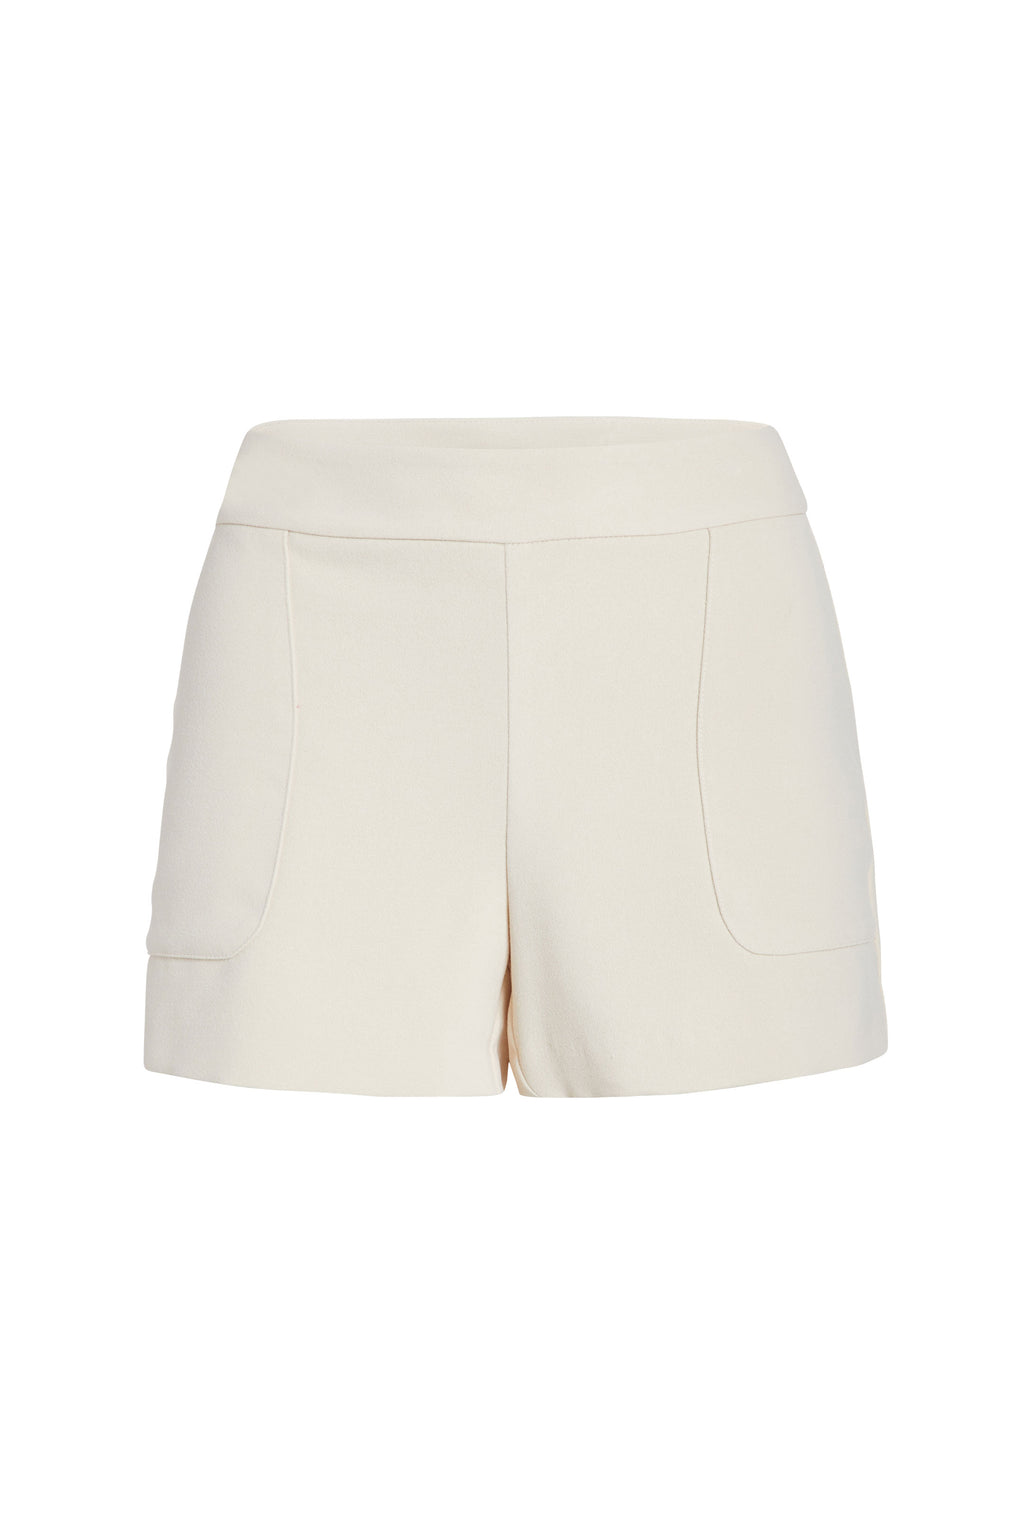 Cream shorts with a side zipper and pockets 